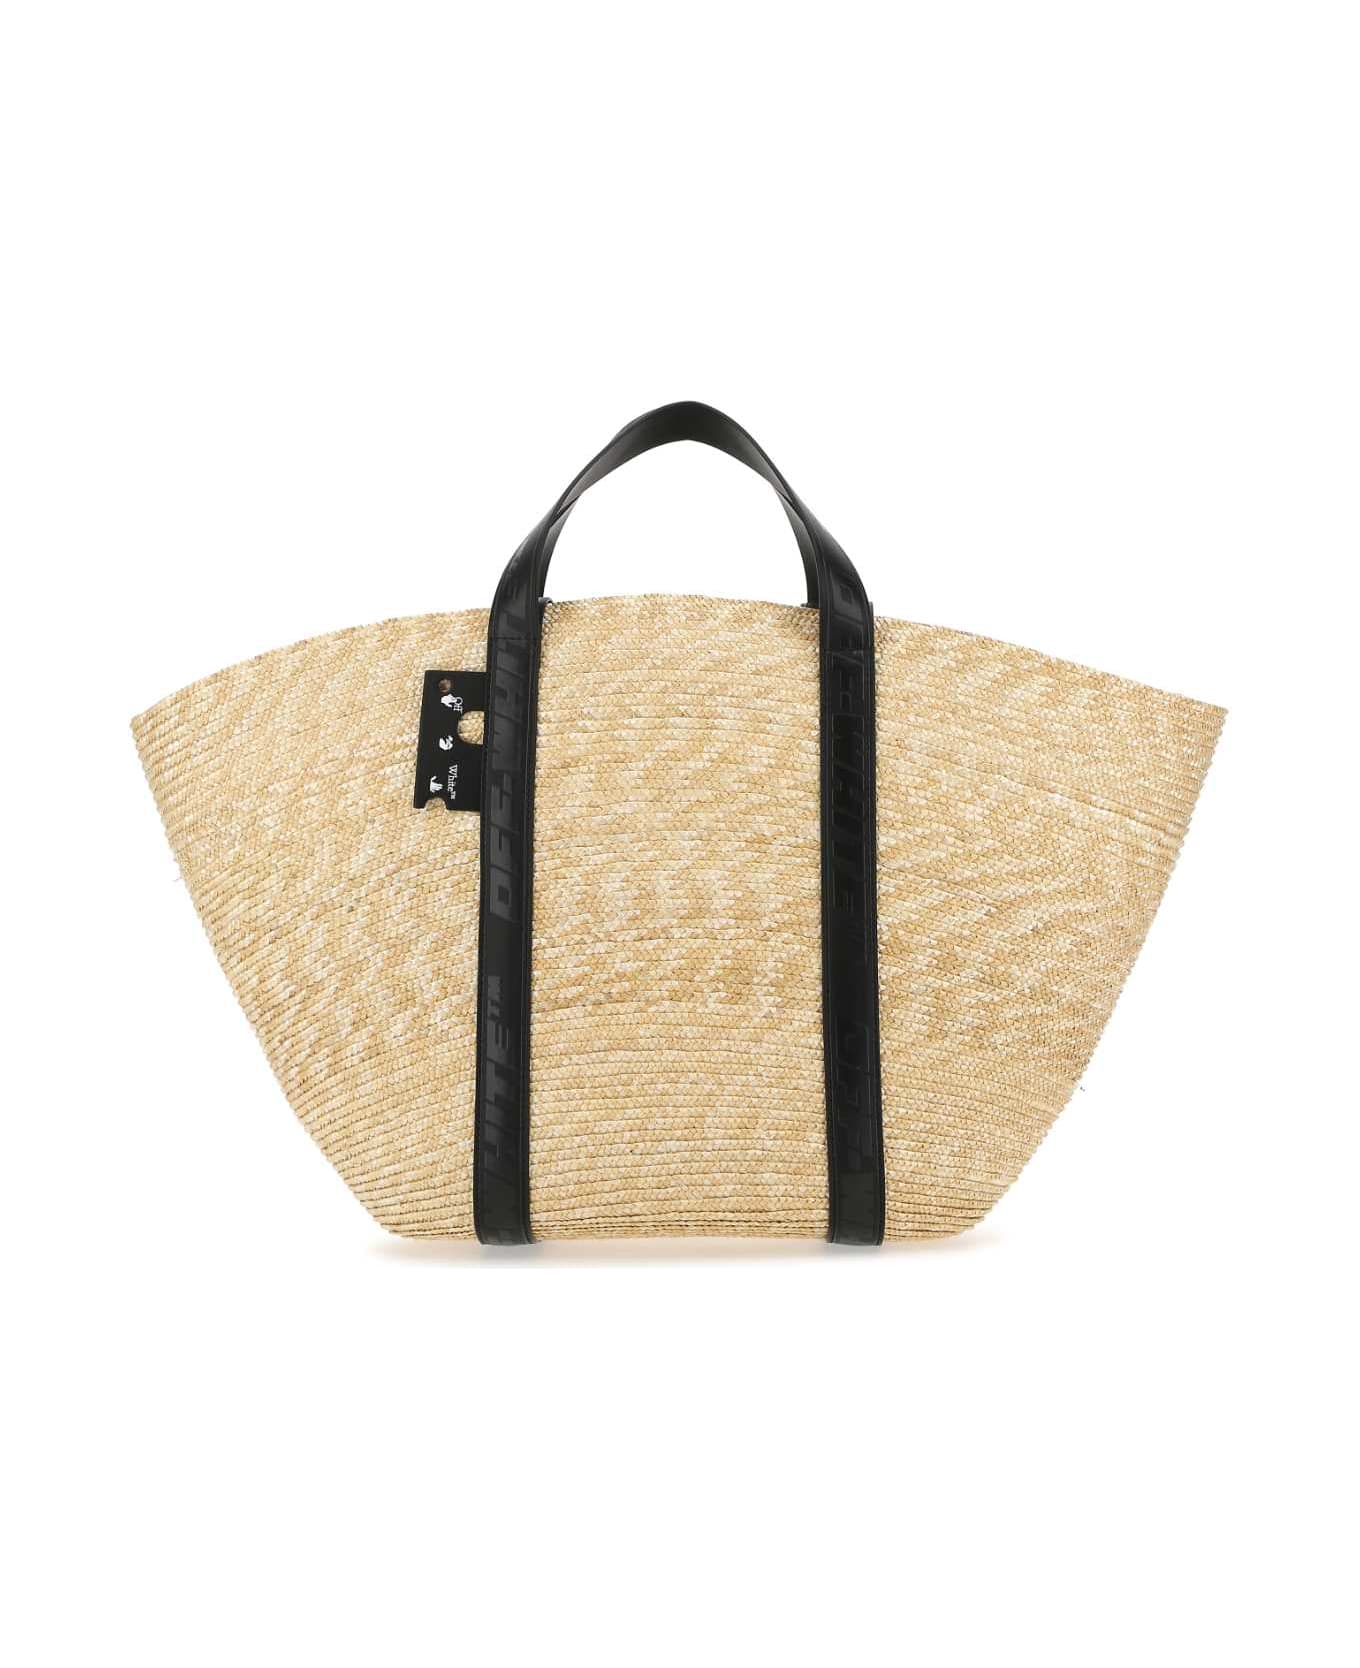 Off-White Straw Commercial 45 Shopping Bag - 6110 トートバッグ